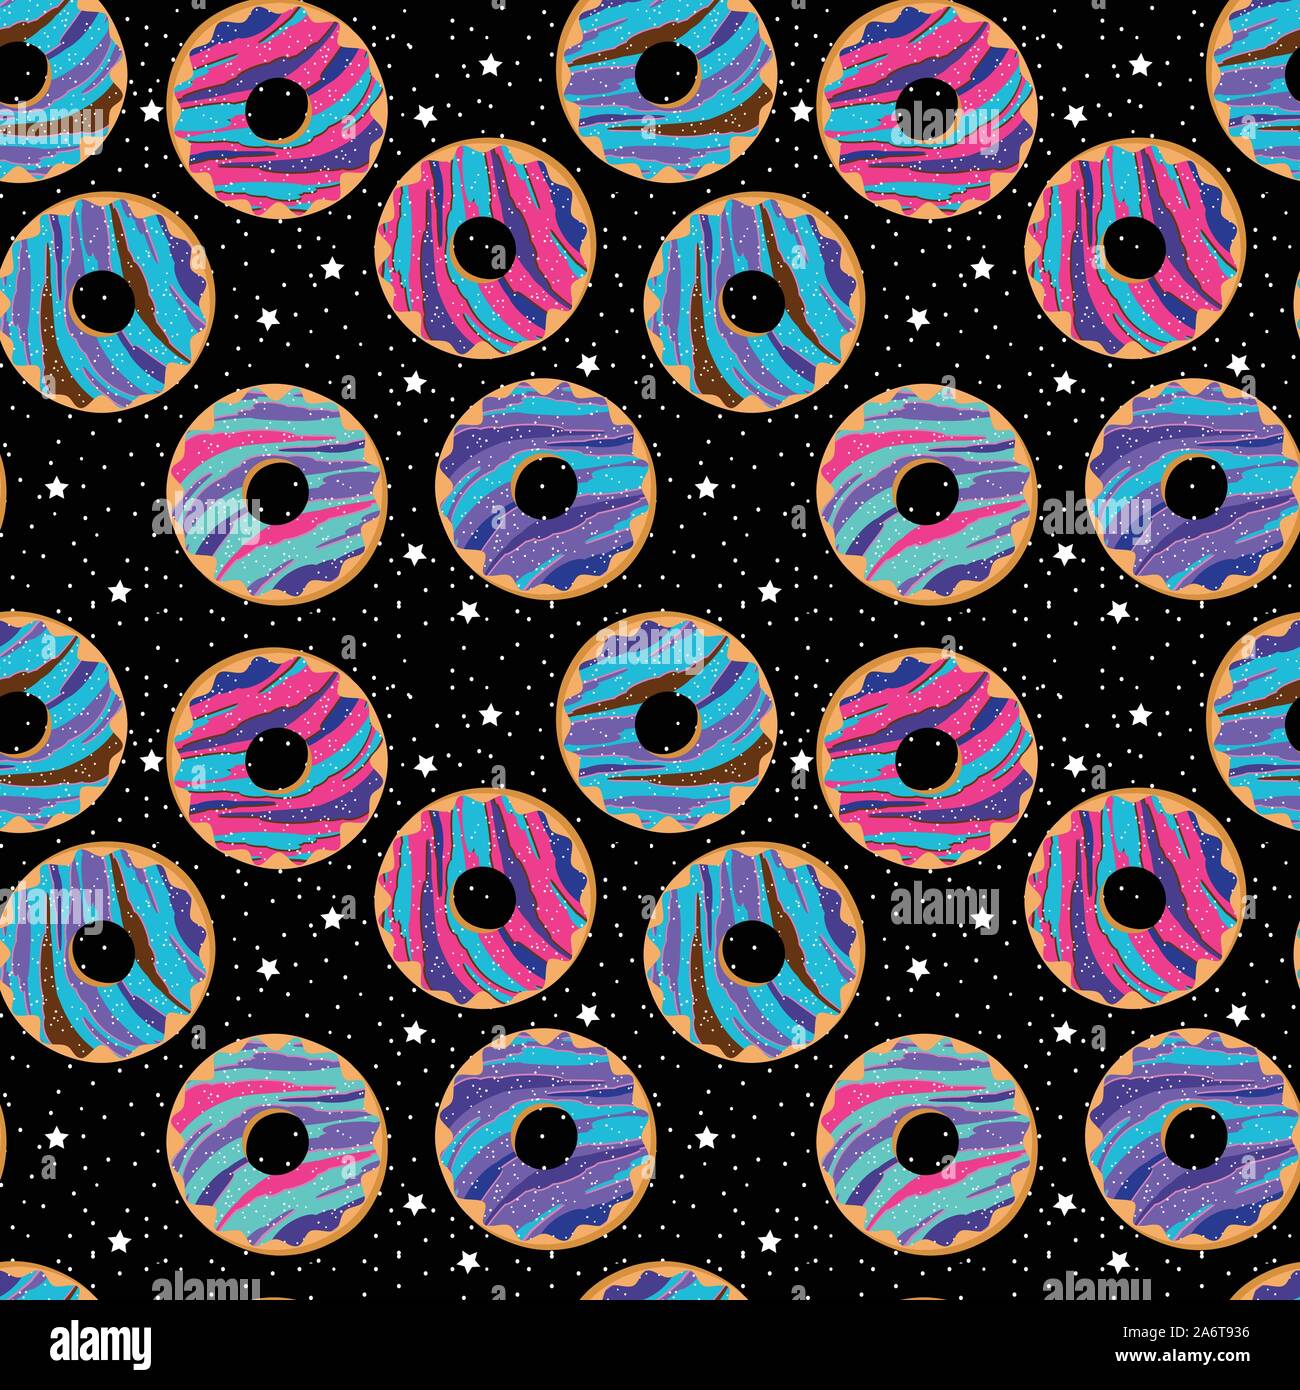 Seamless Vector Background with Galaxy Donuts and Stars Stock Vector